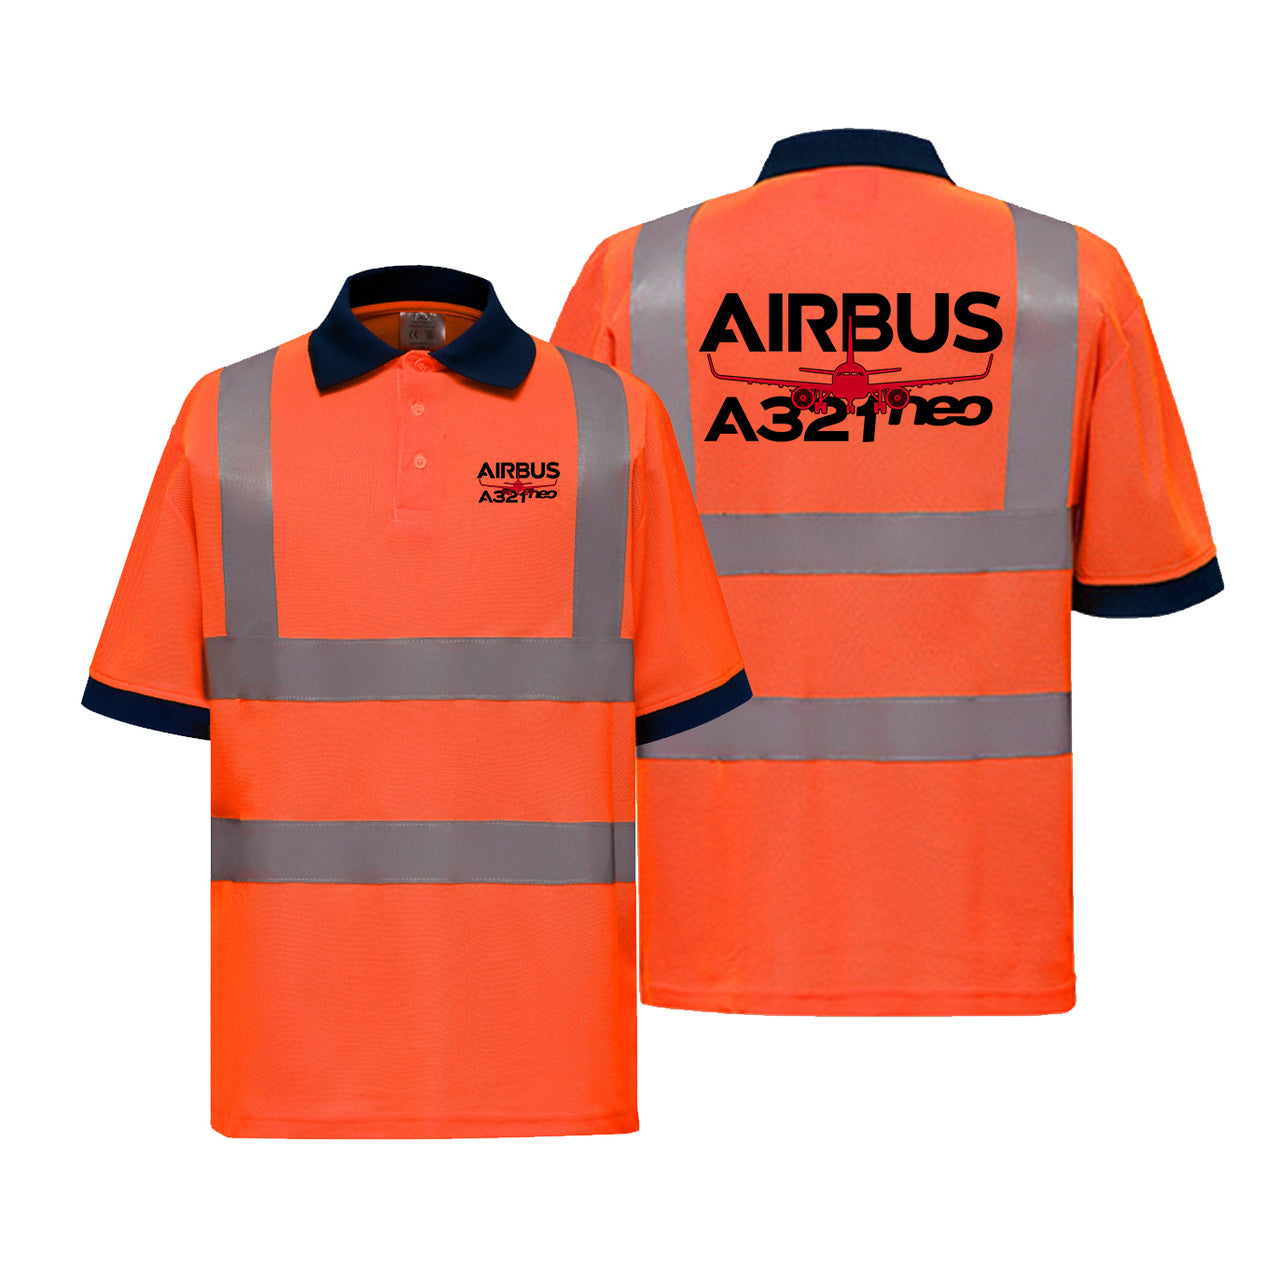 Amazing Airbus A321neo Designed Reflective Polo T-Shirts